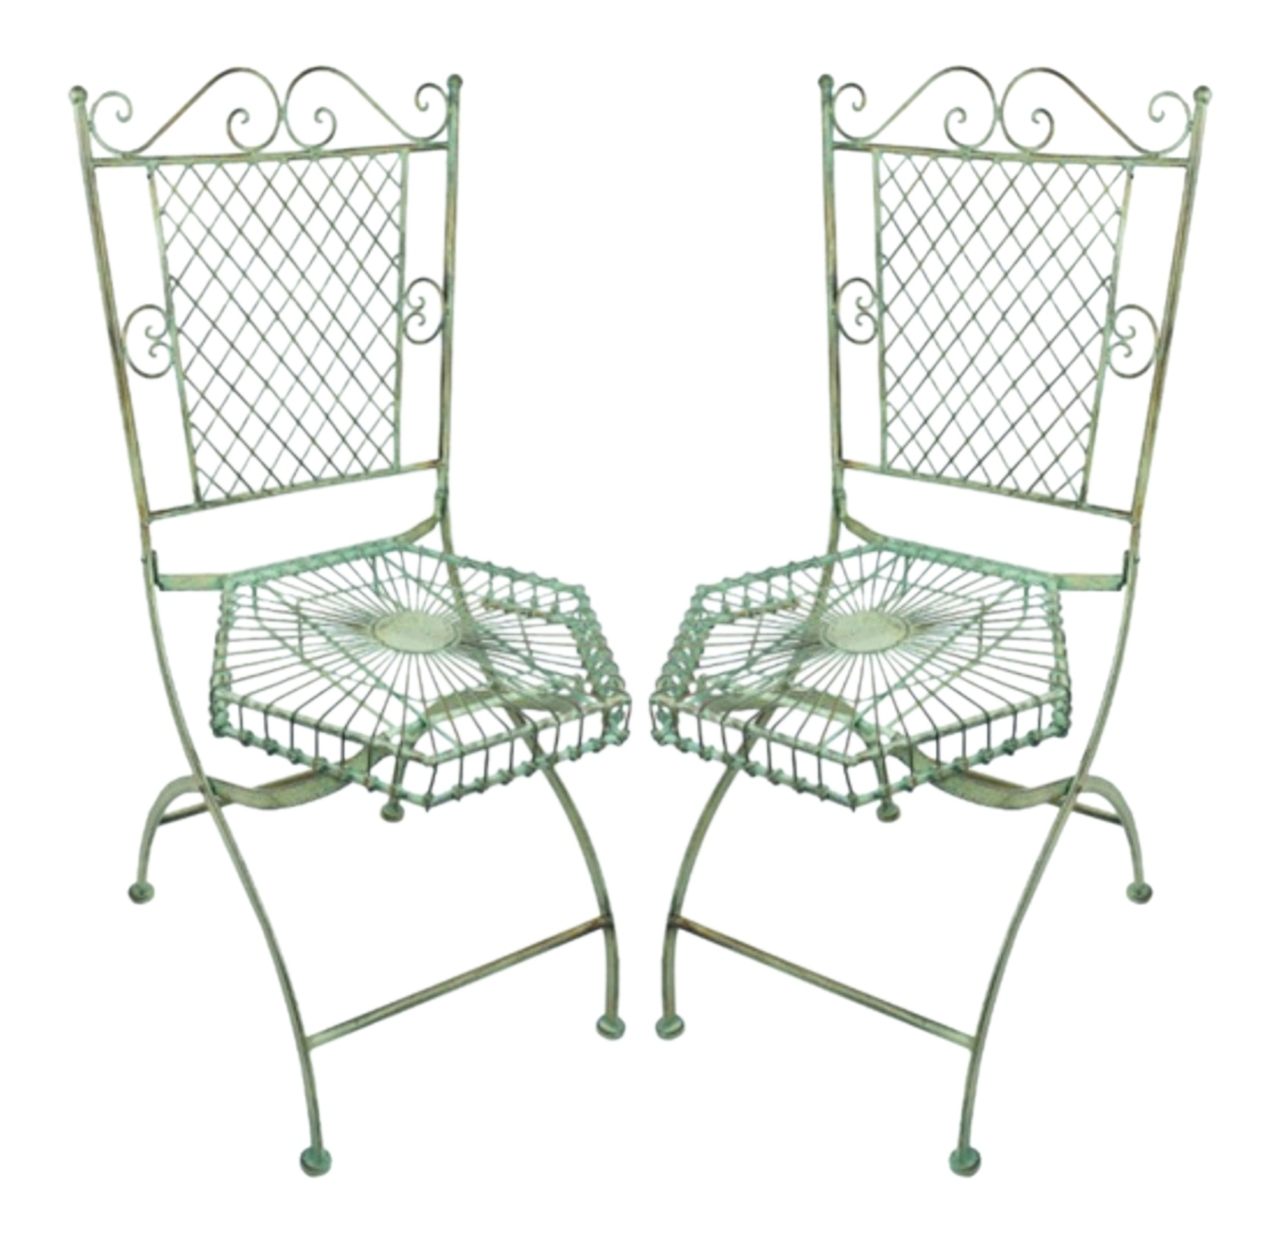 Ornate Patio Chairs Set of 2 Cast Iron Green Antiqued Finish